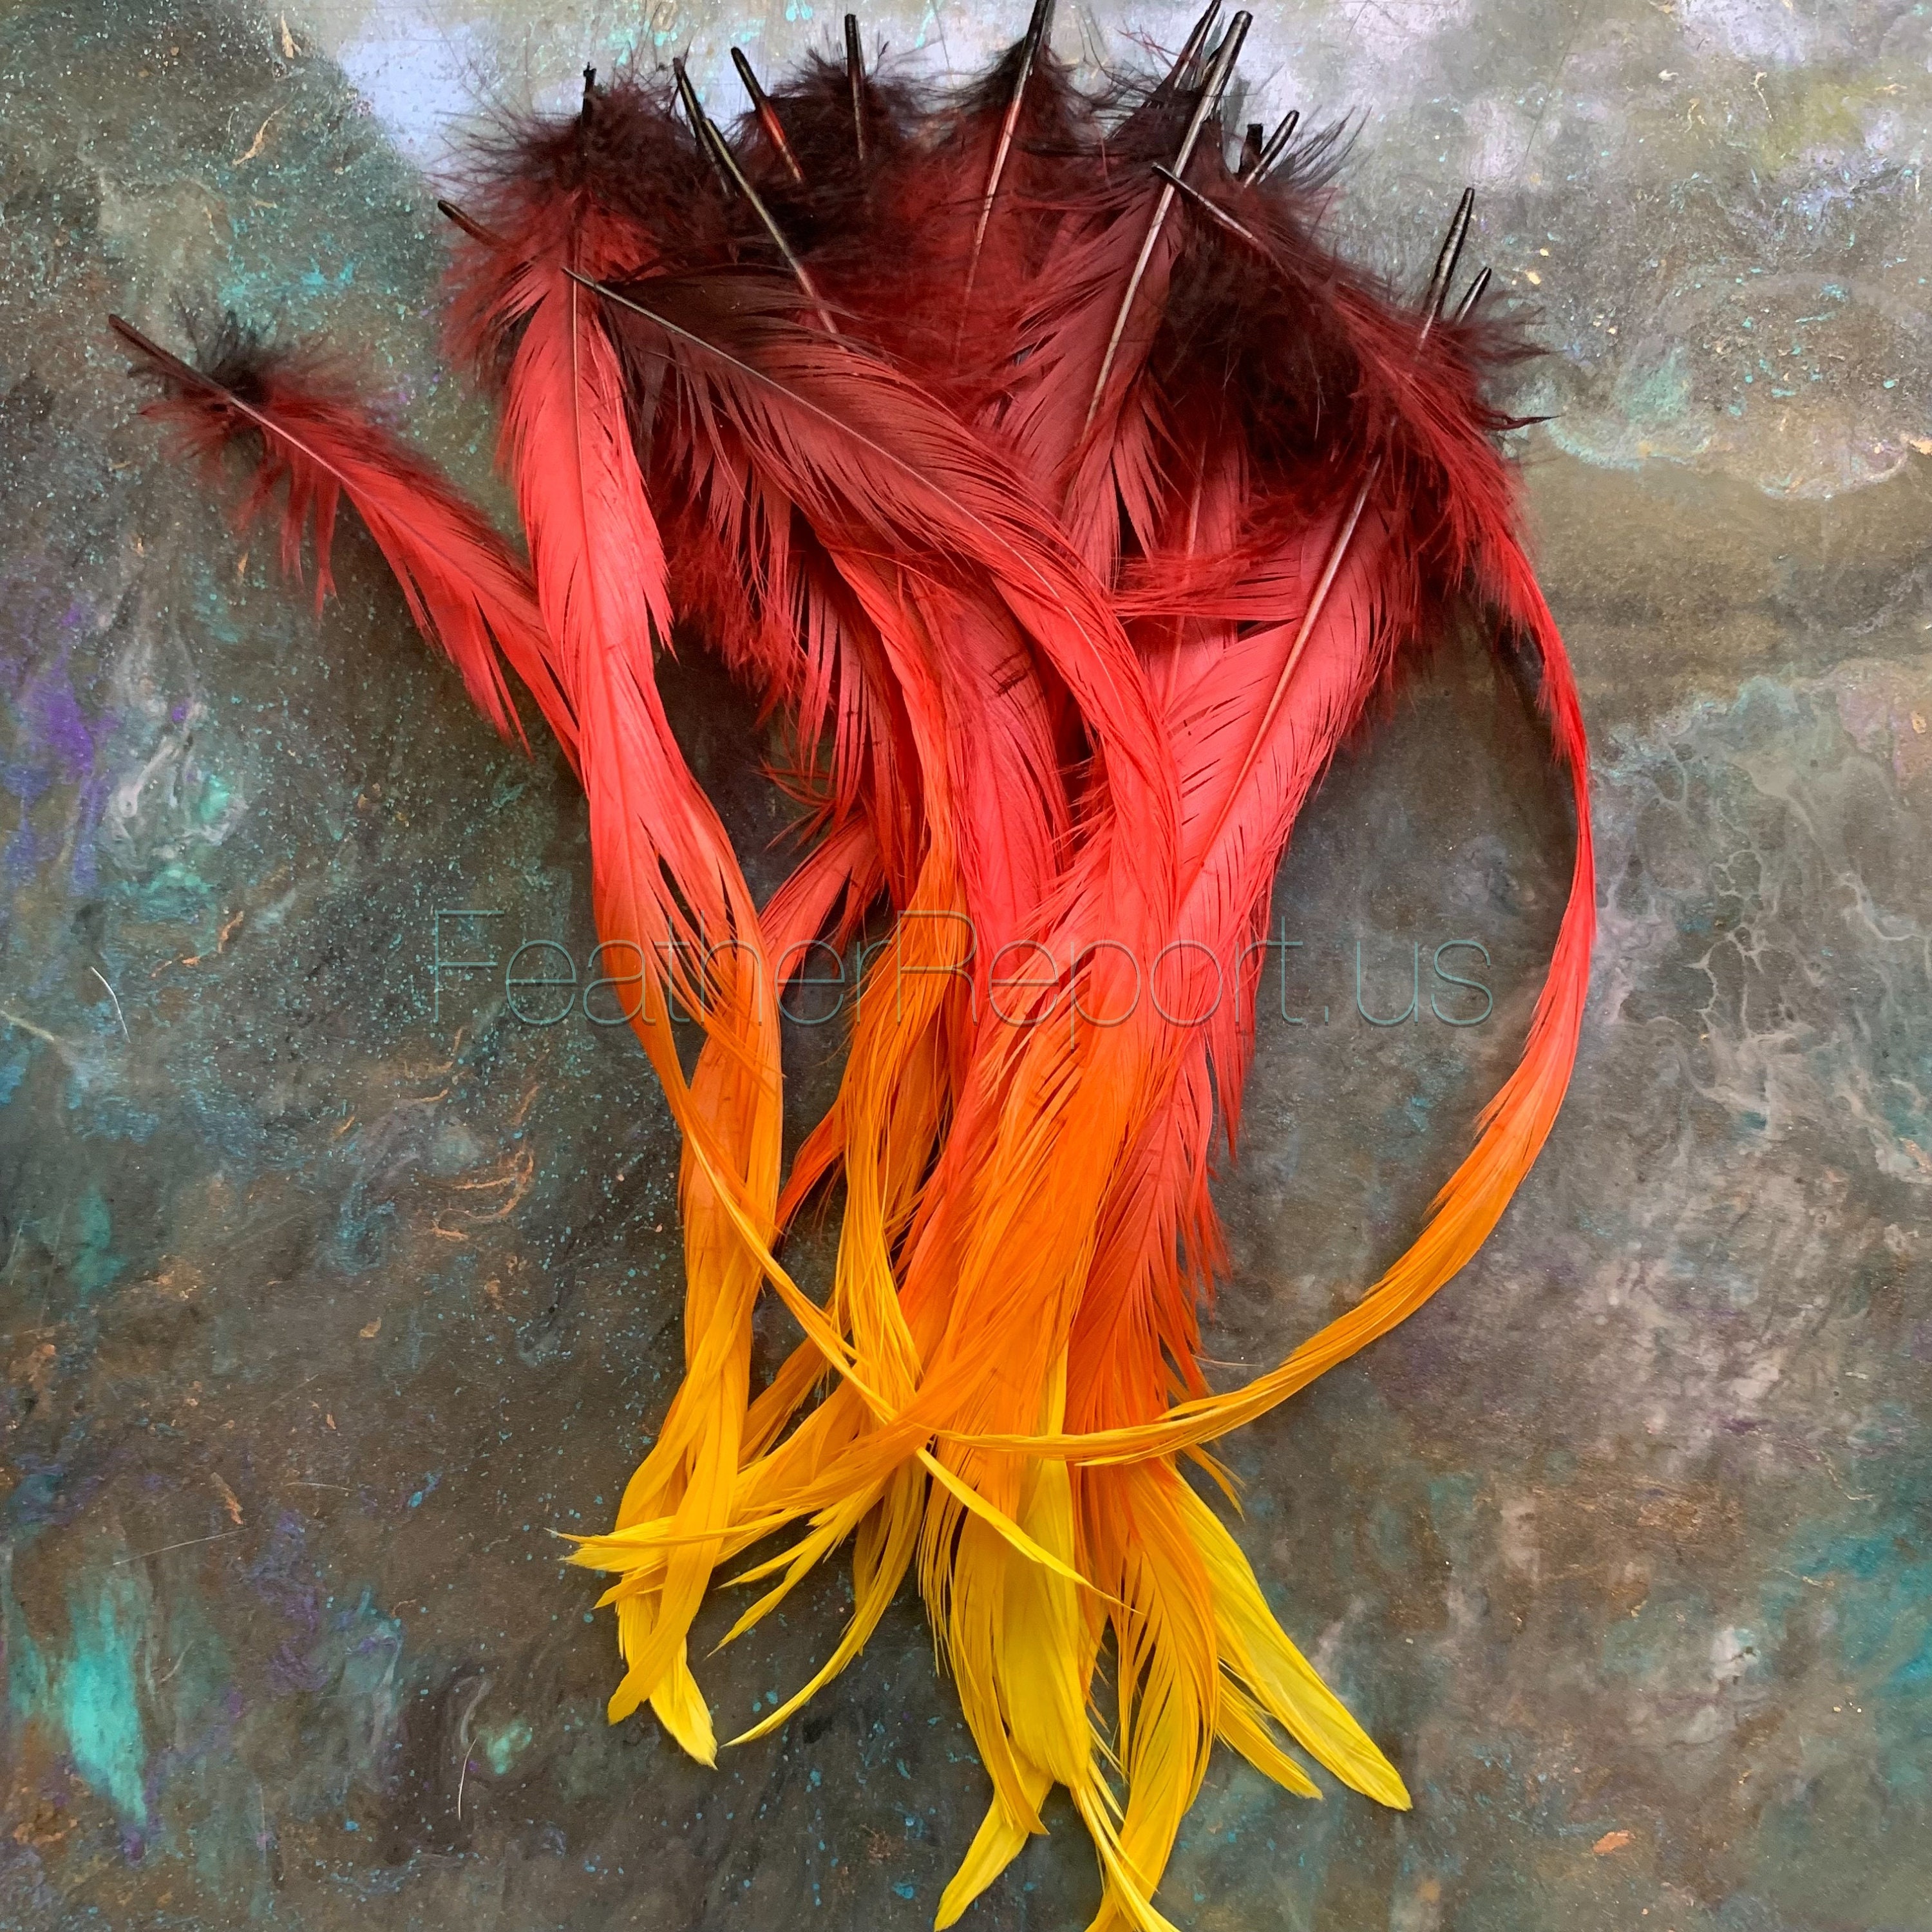 Black Laced Red Rooster Craft Feathers from Real Birds